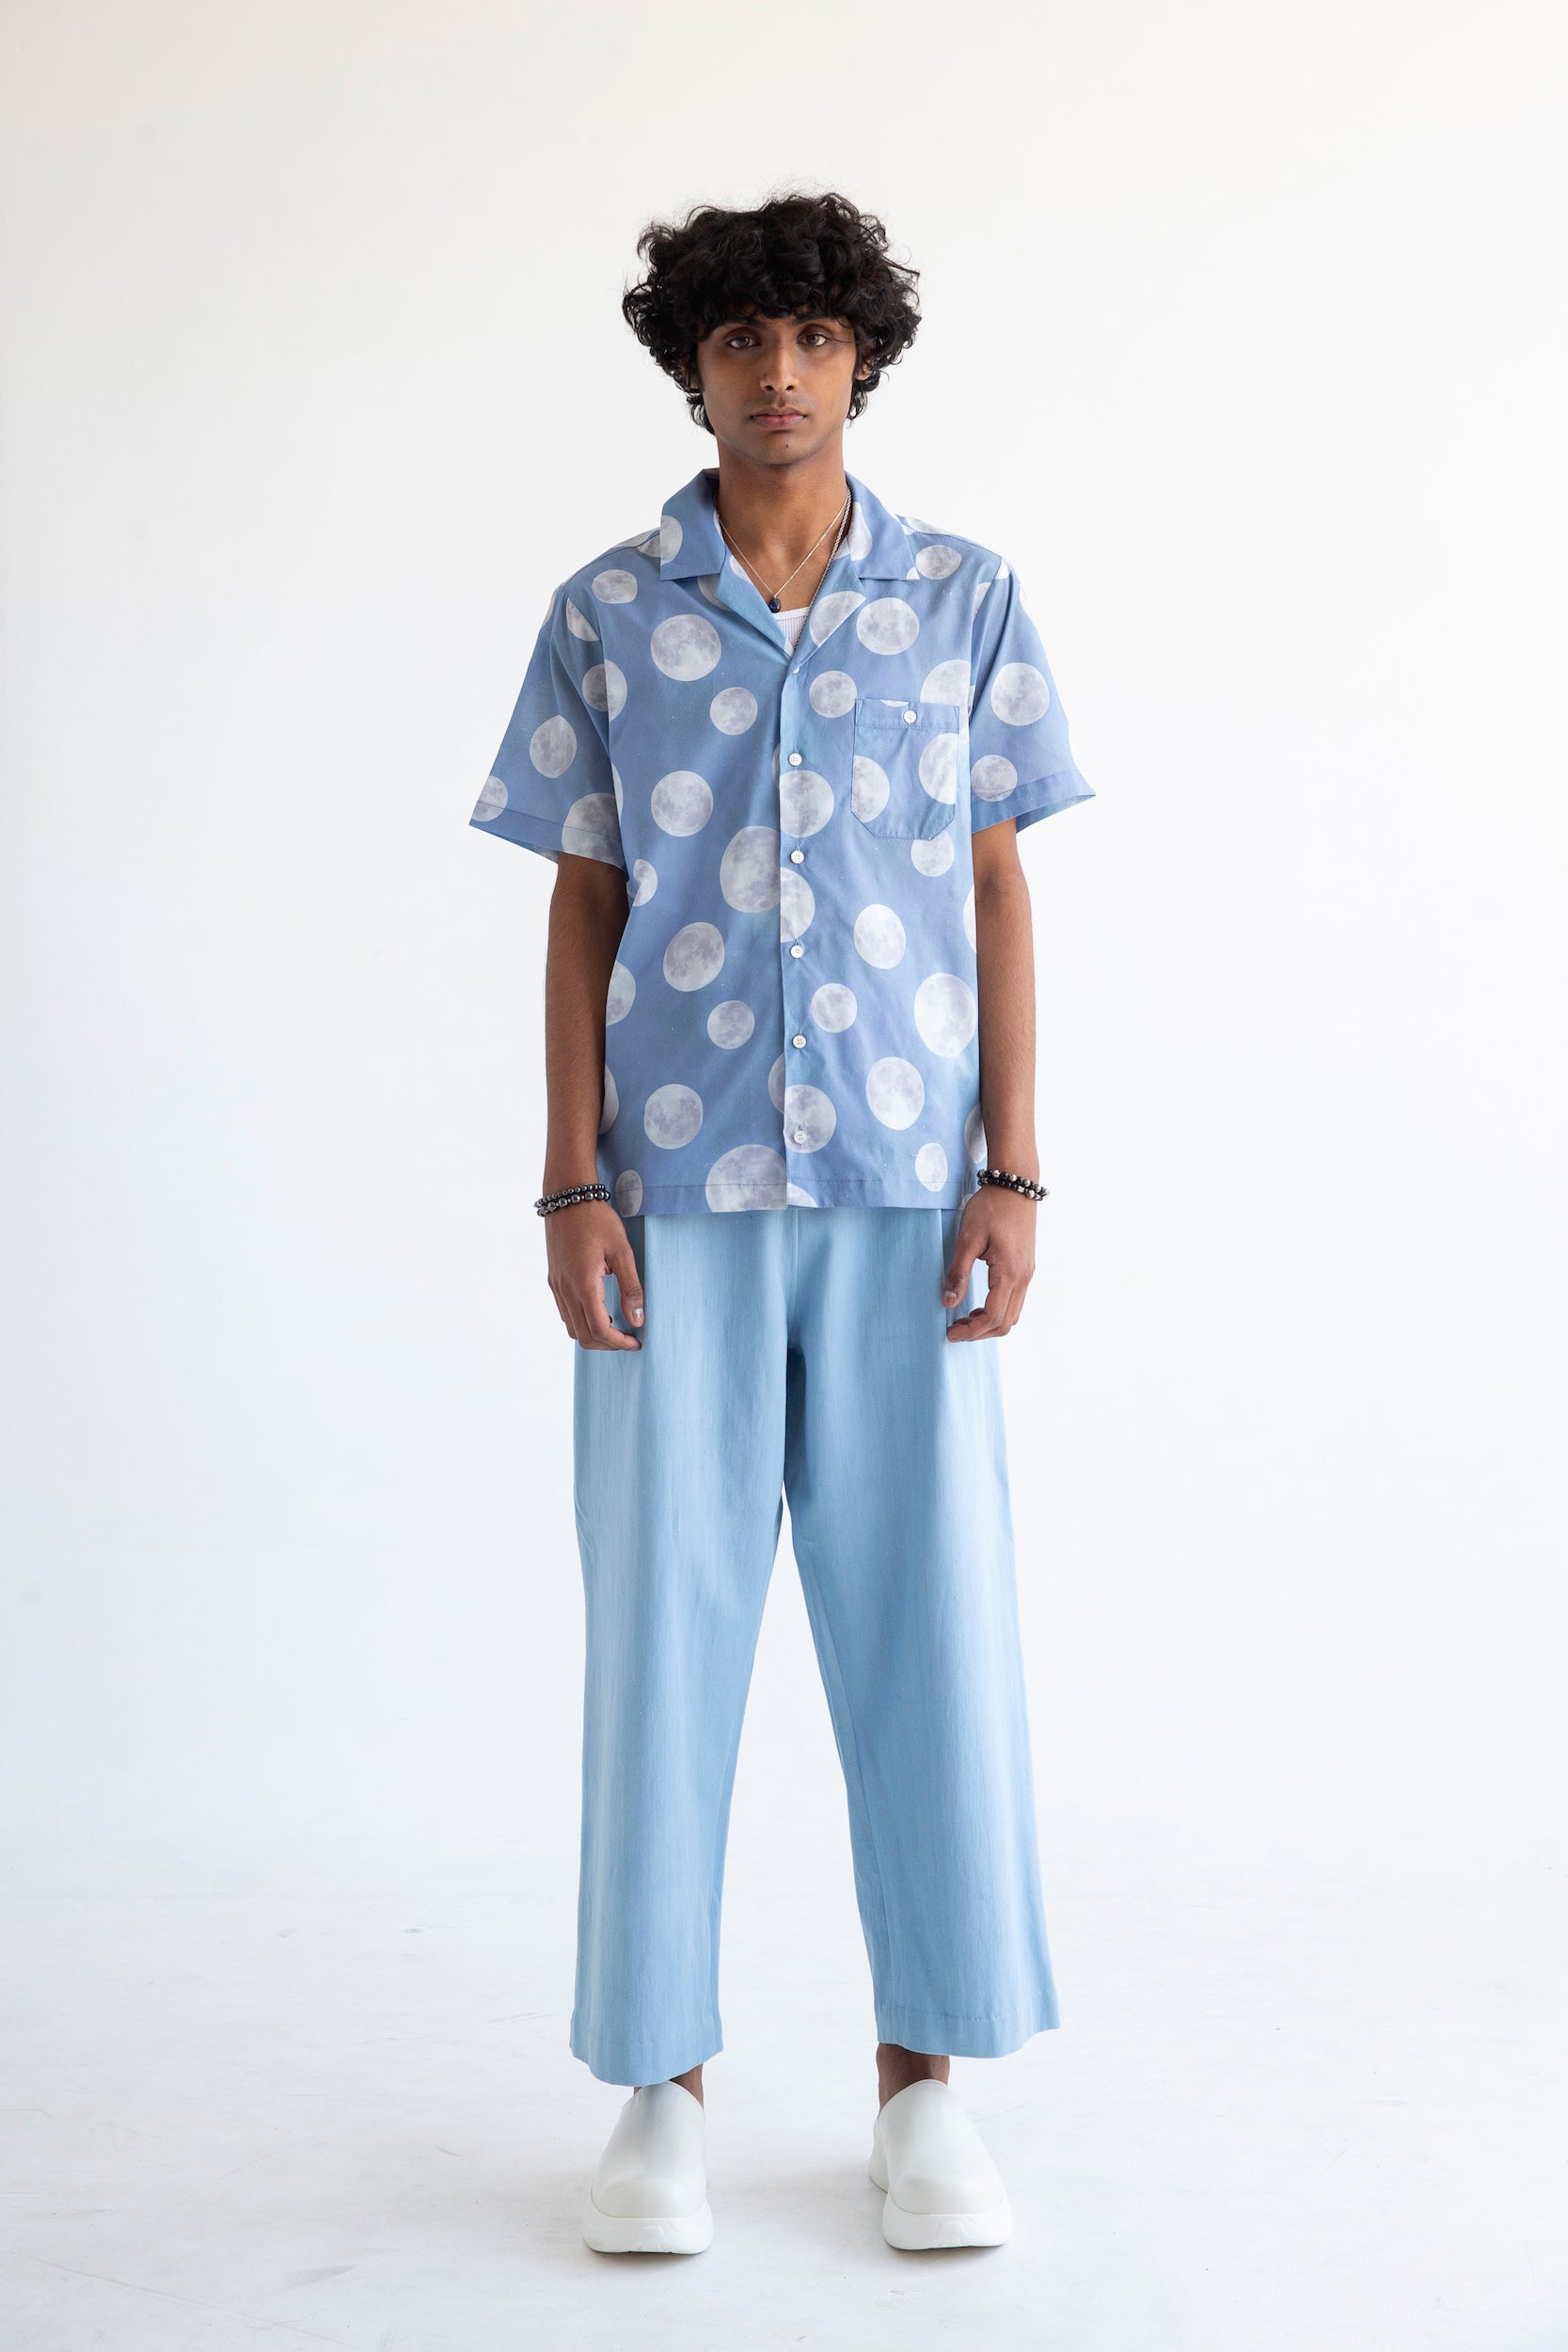 casual mens outfit with resort shirt and light blue pants